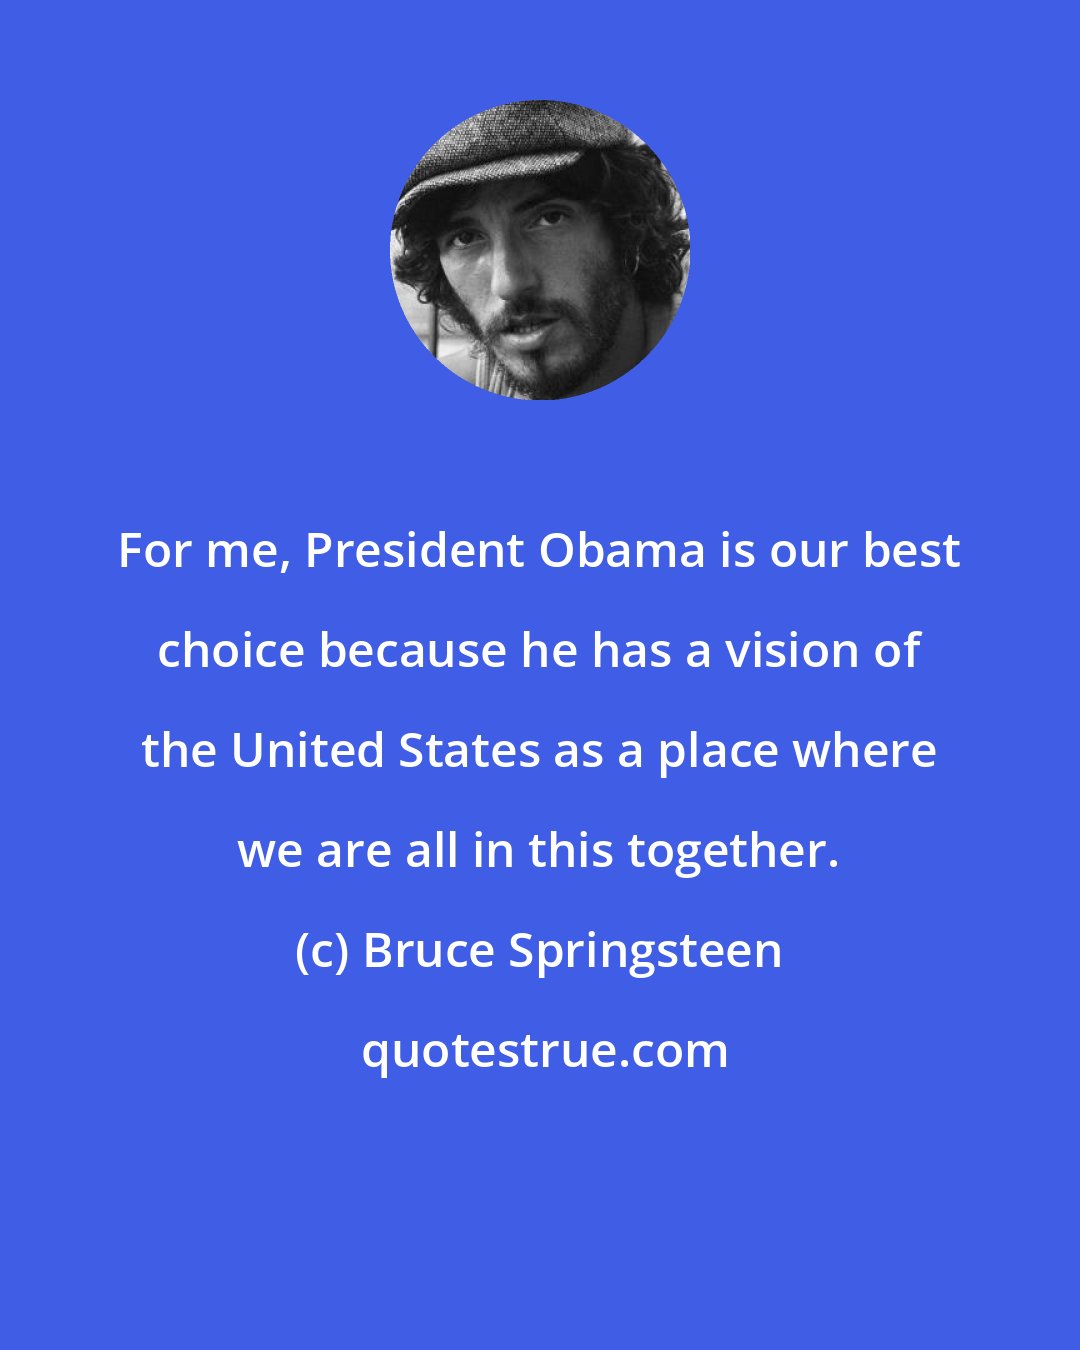 Bruce Springsteen: For me, President Obama is our best choice because he has a vision of the United States as a place where we are all in this together.